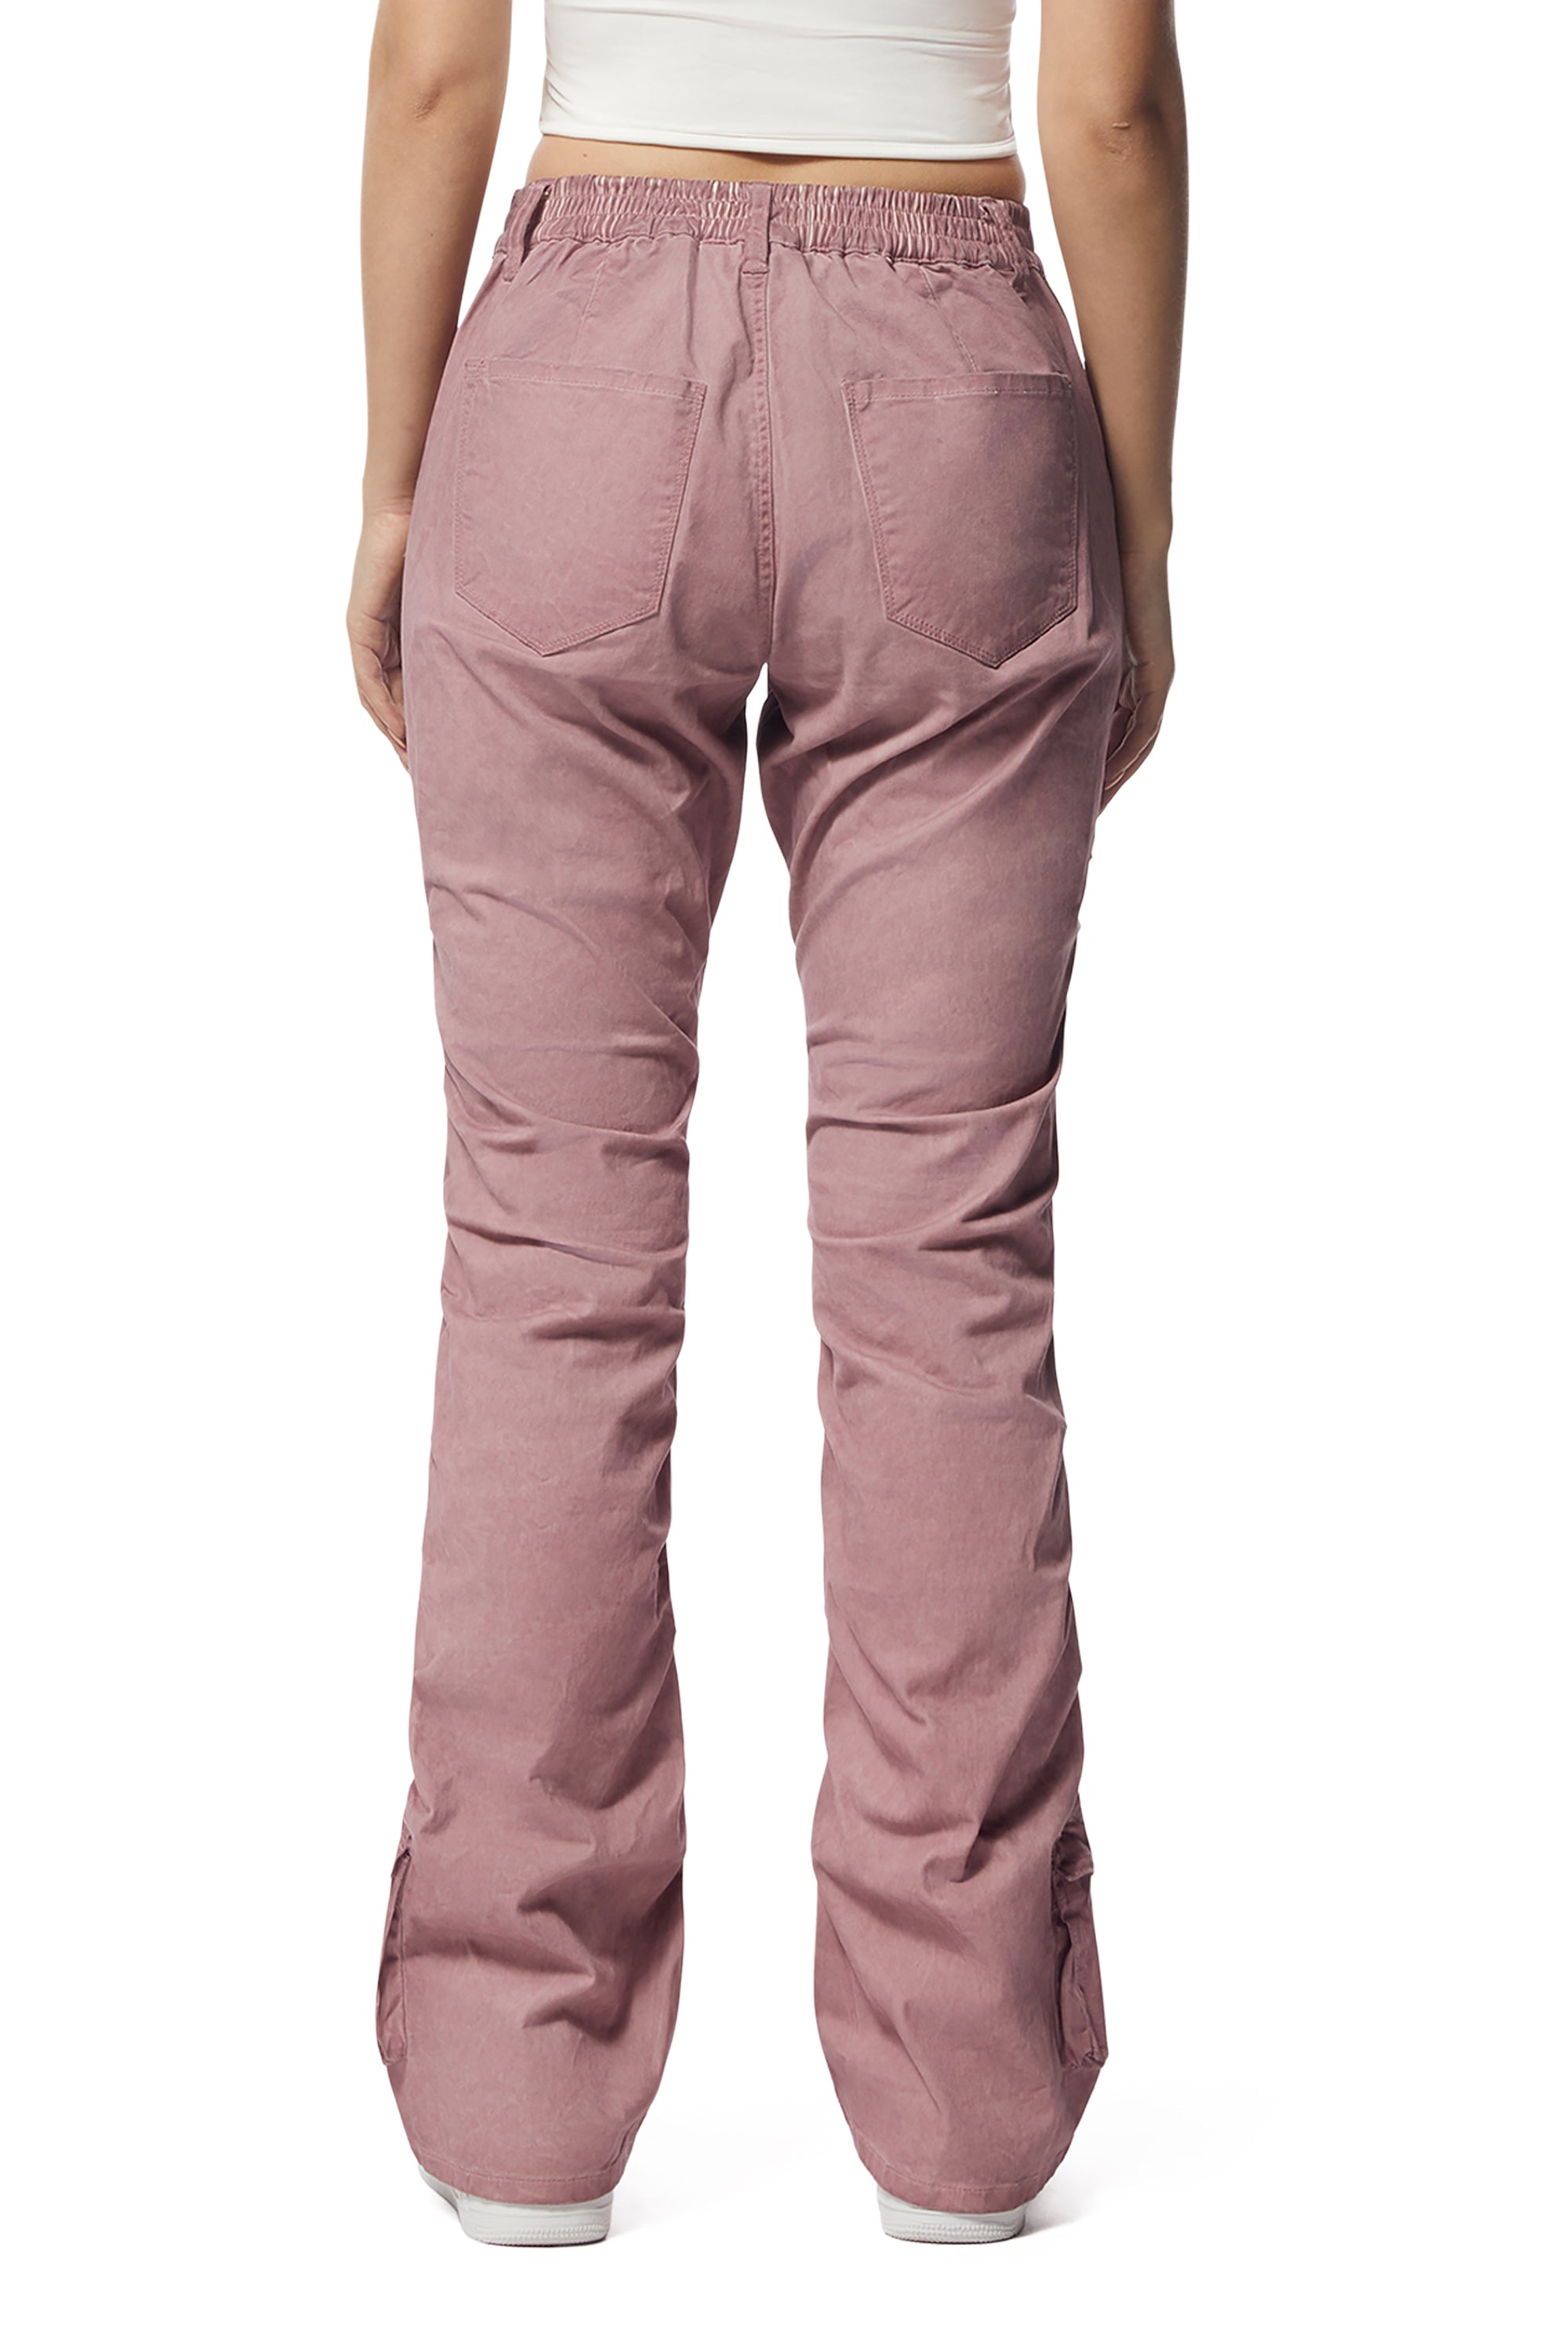 Pigment Dyed Utility Twill Pants - Misty Pink